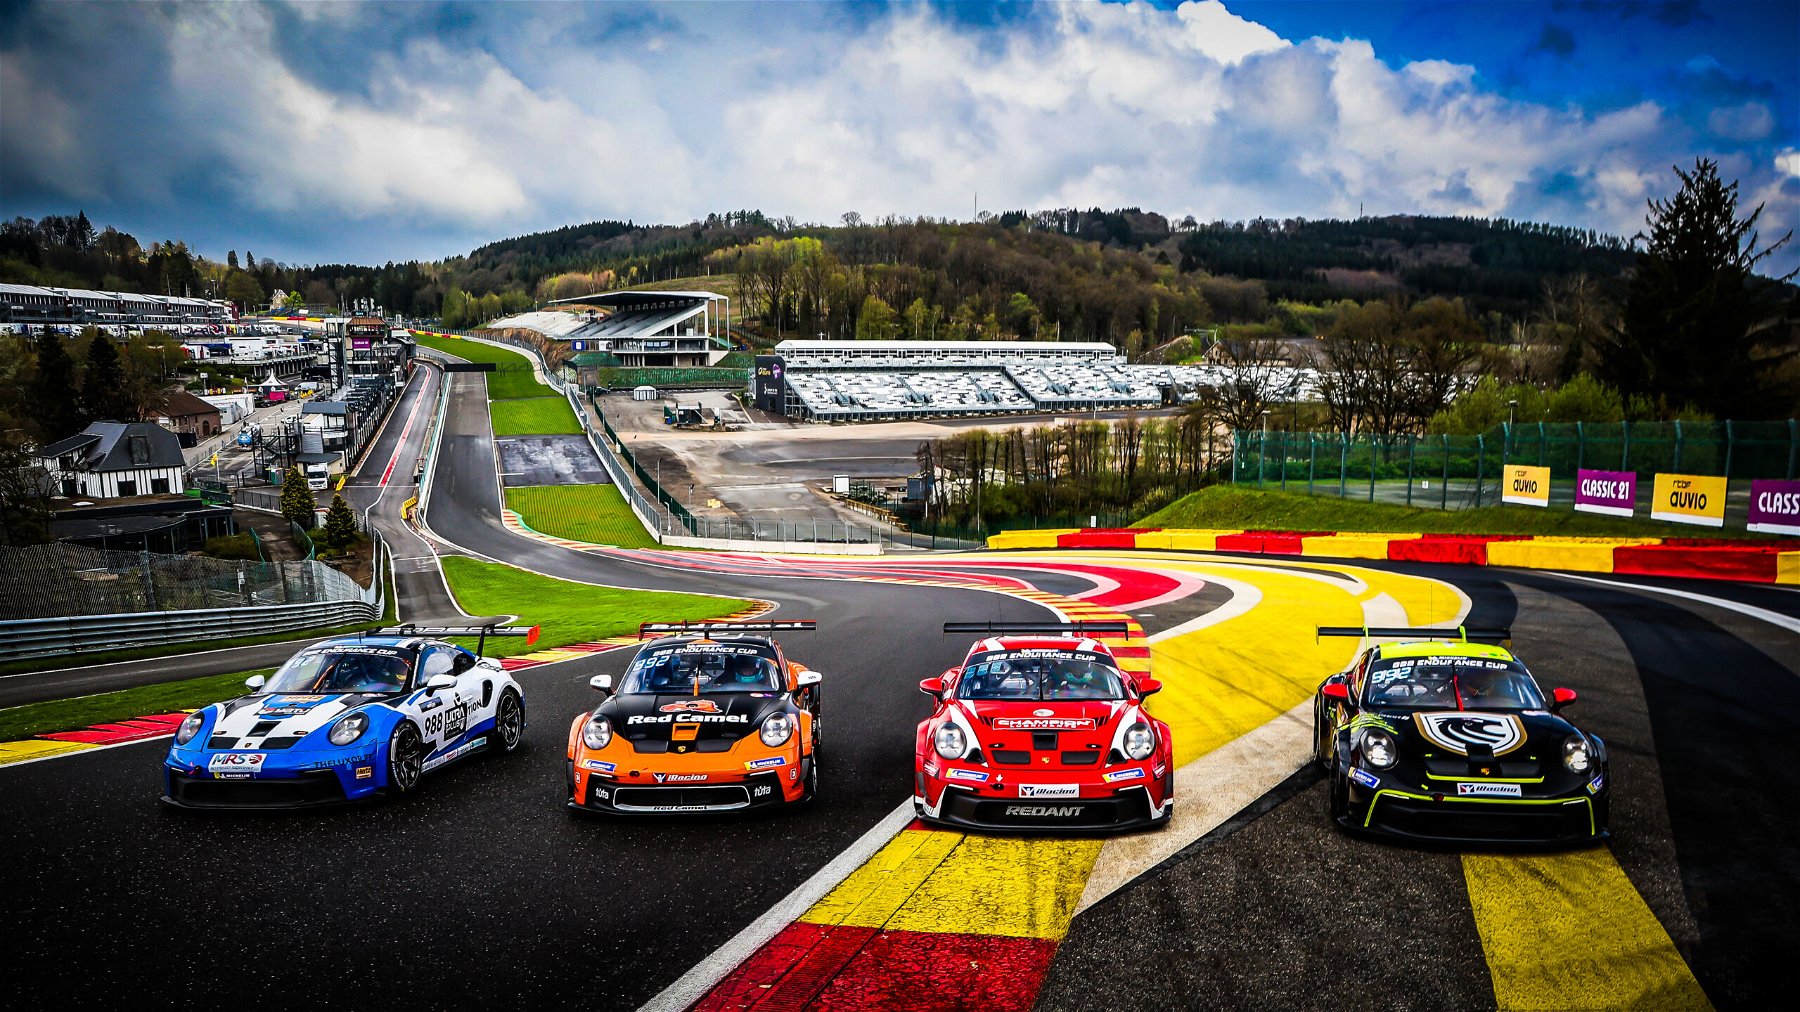 The 12-hour sprint race – 992 Endurance Cup by Creventic